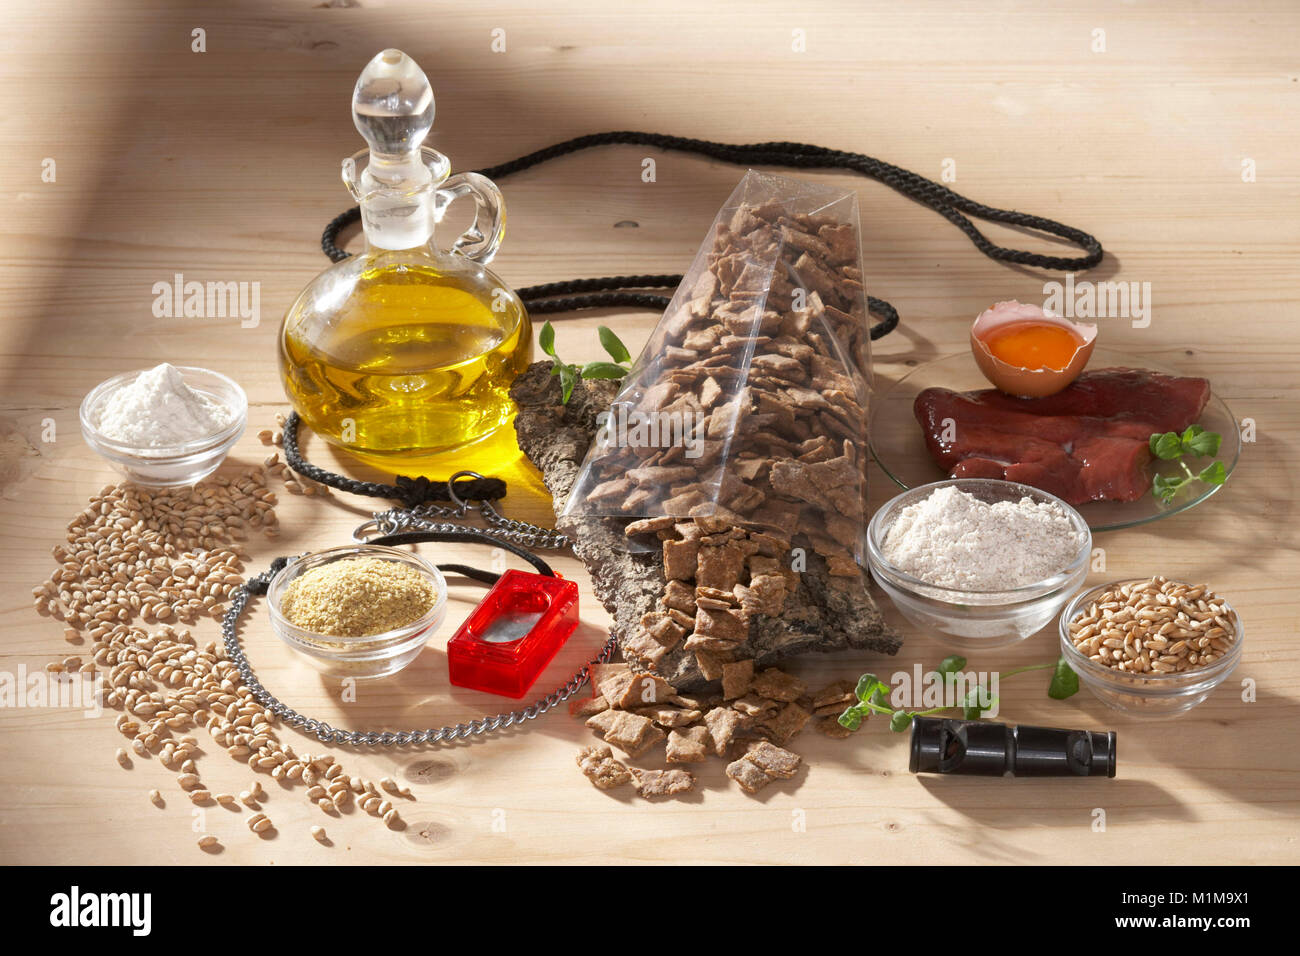 Domestic dog. Ingredients for biscuits as rewards for dogs and freshly baked biscuits. Germany Stock Photo